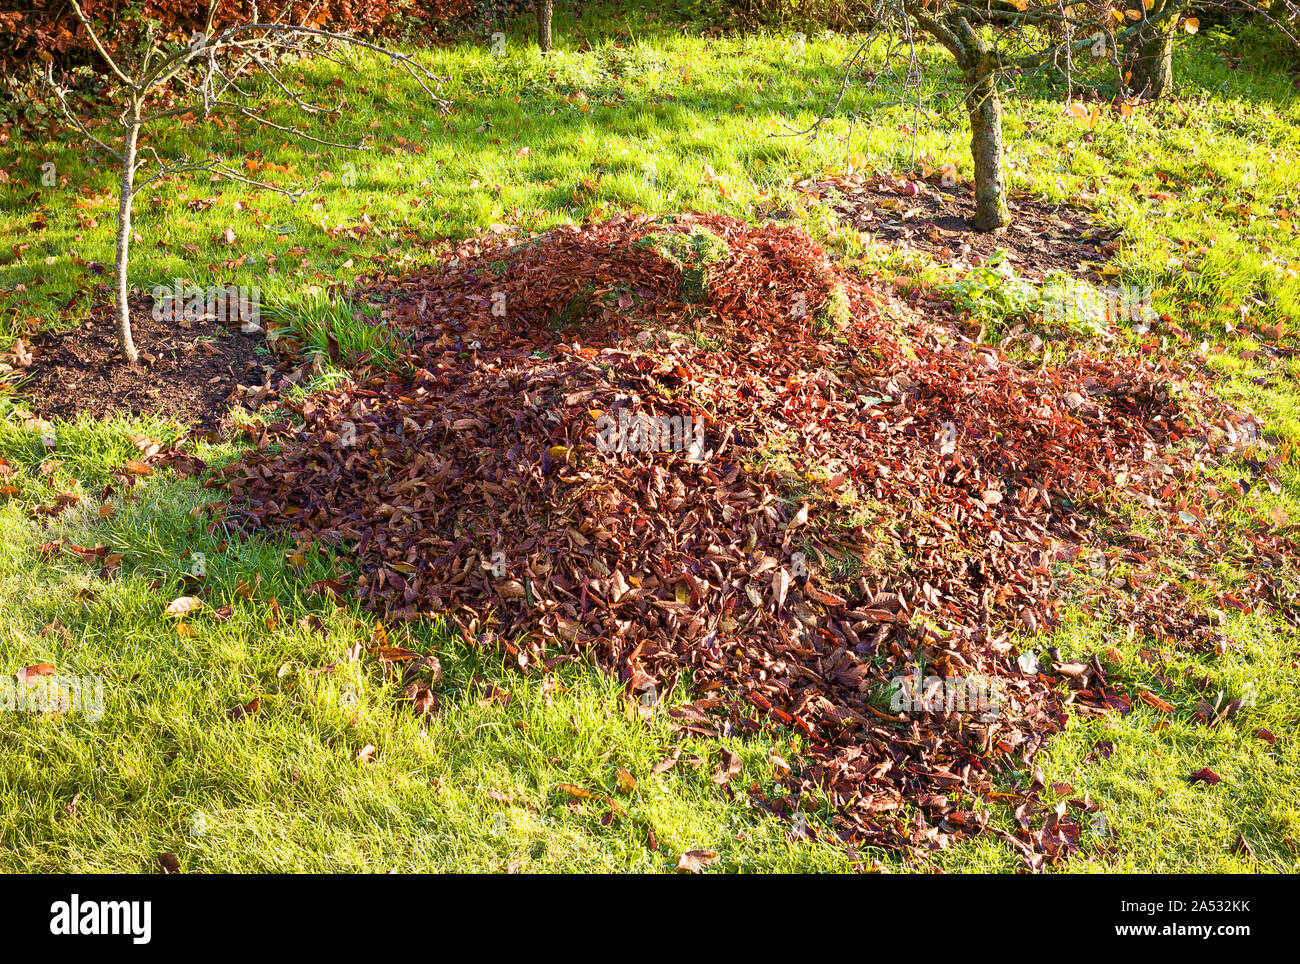 A pile of collected fallen leaves and grass cuttings ready to be used as mulch around fruit trees in a small orchard in November in an English garden Stock Photo